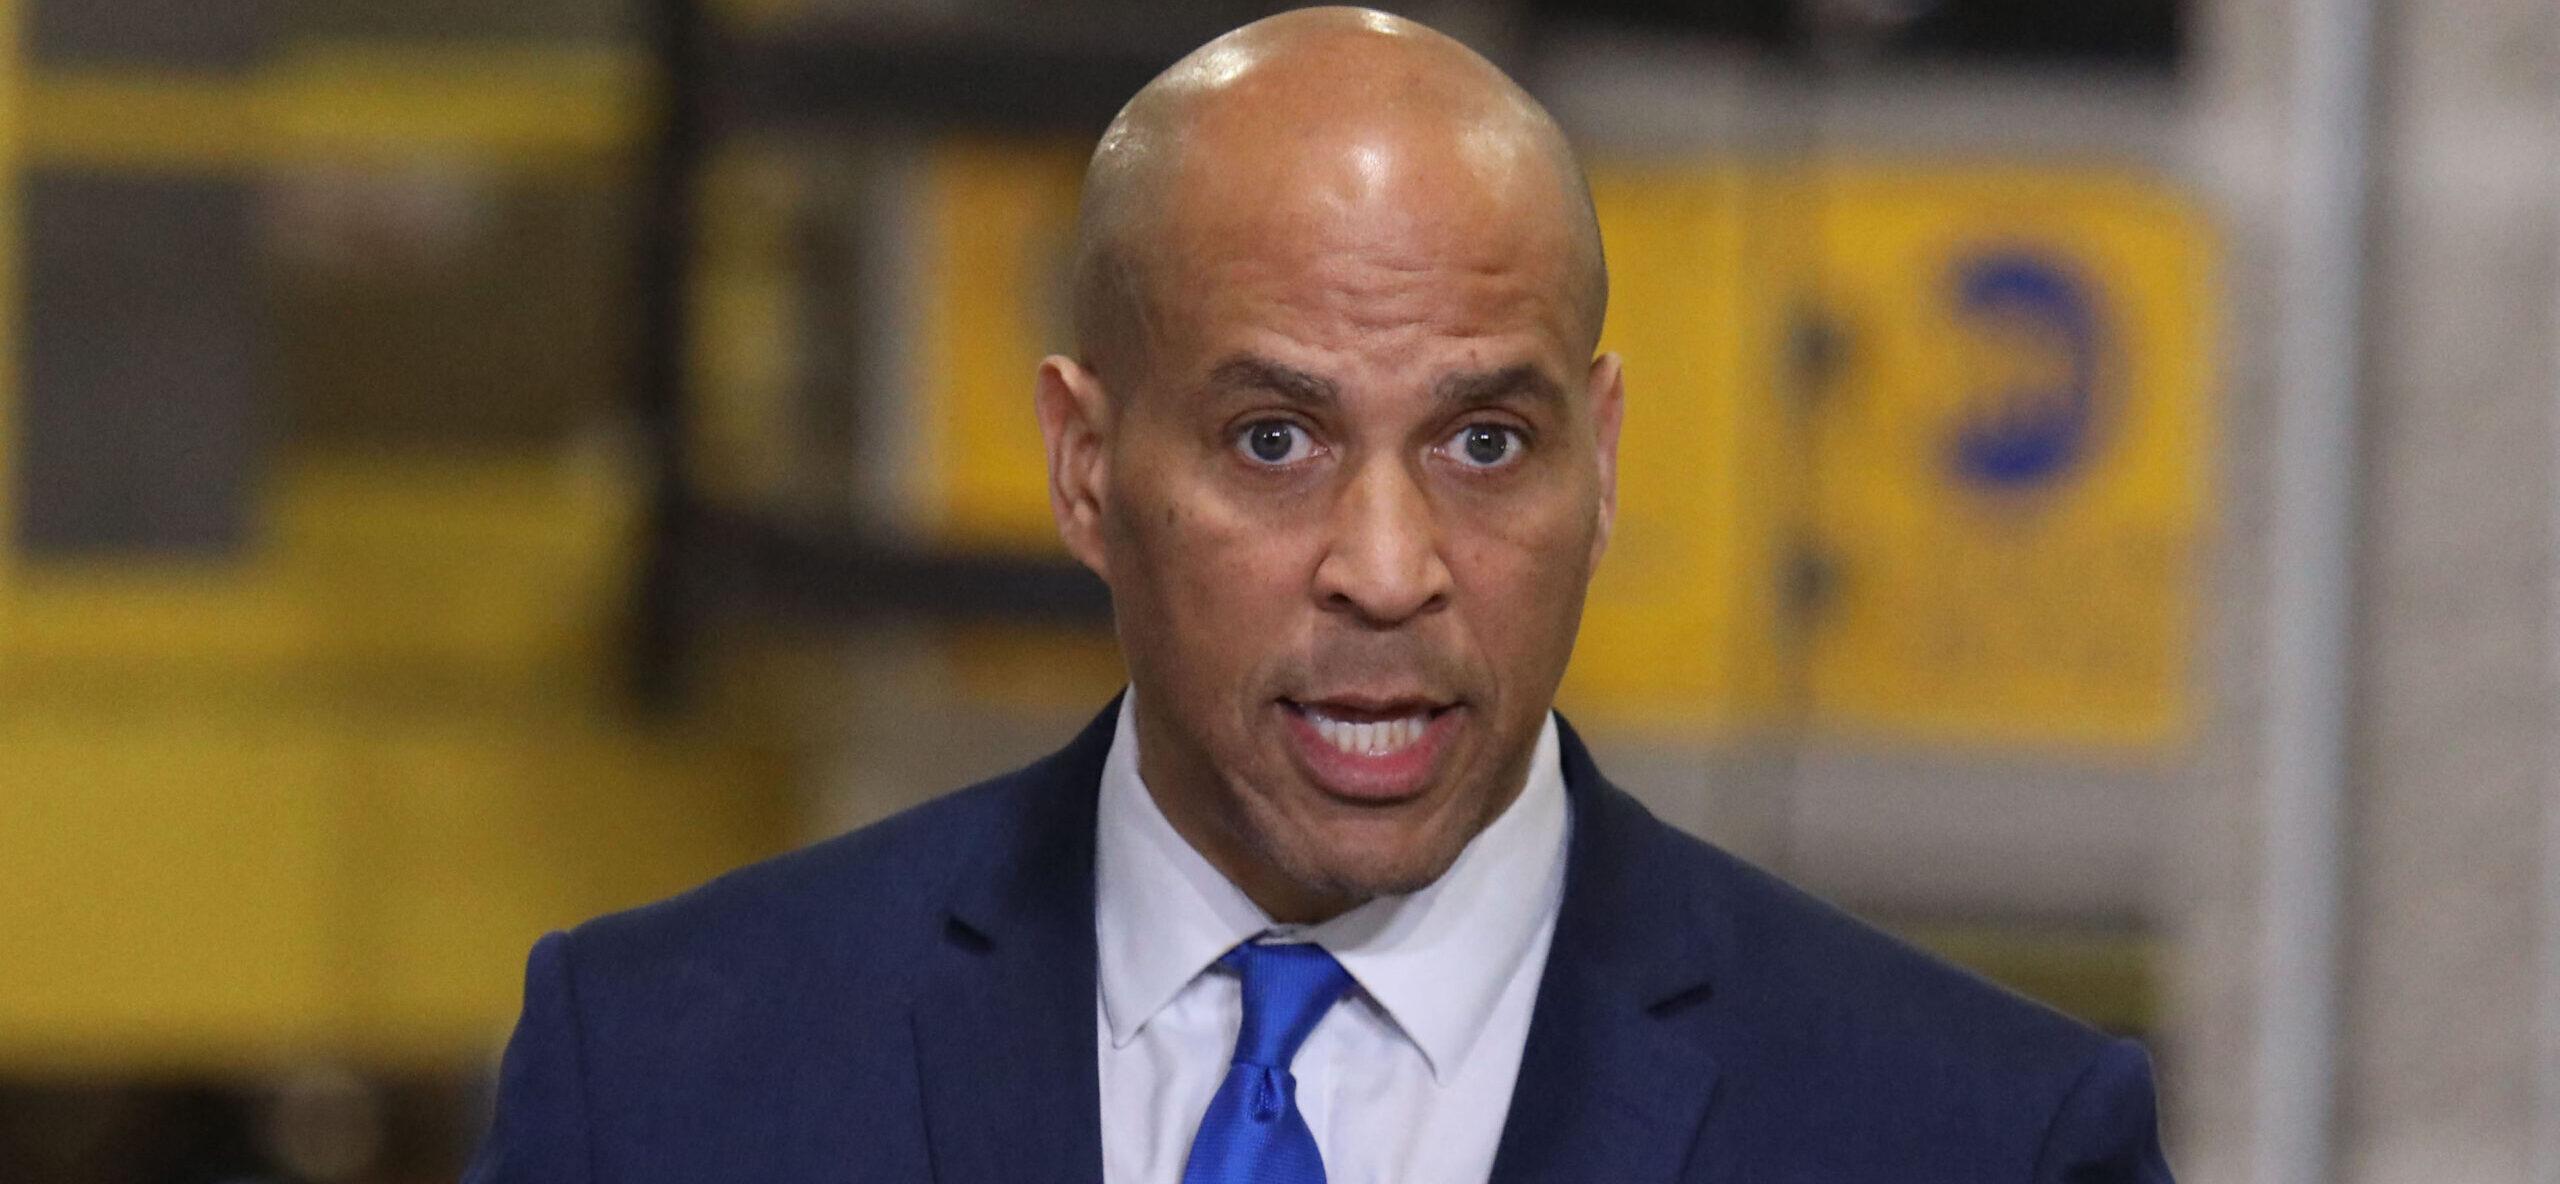 Sen. Cory Booker Details His Journey While Jogging To Reach Bomb Shelter During Israel Attack